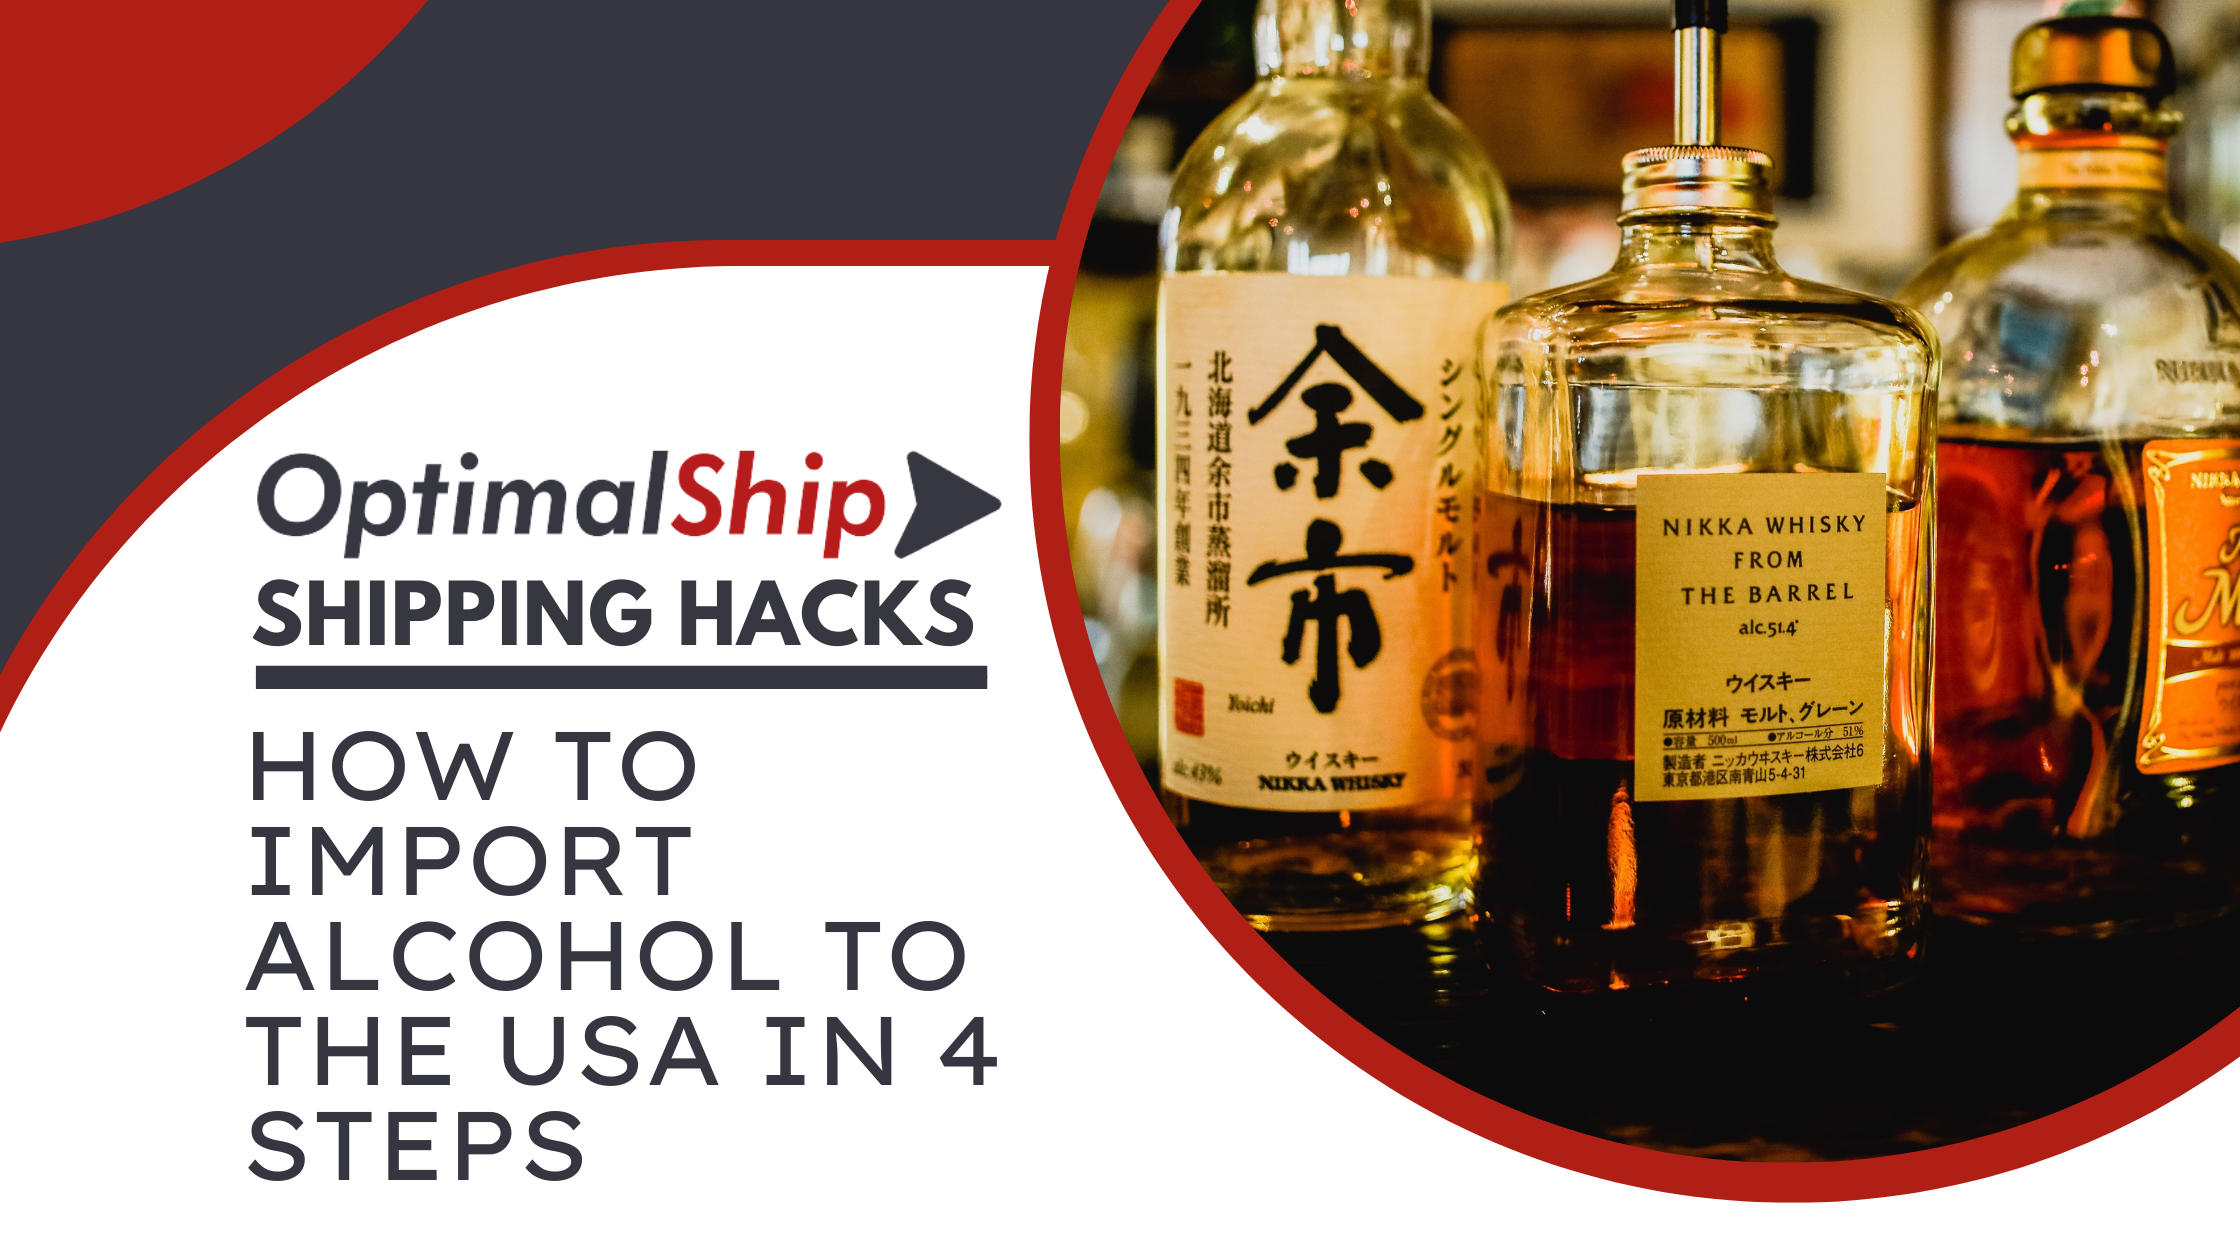 How to Import Alcohol to the USA in 4 Steps